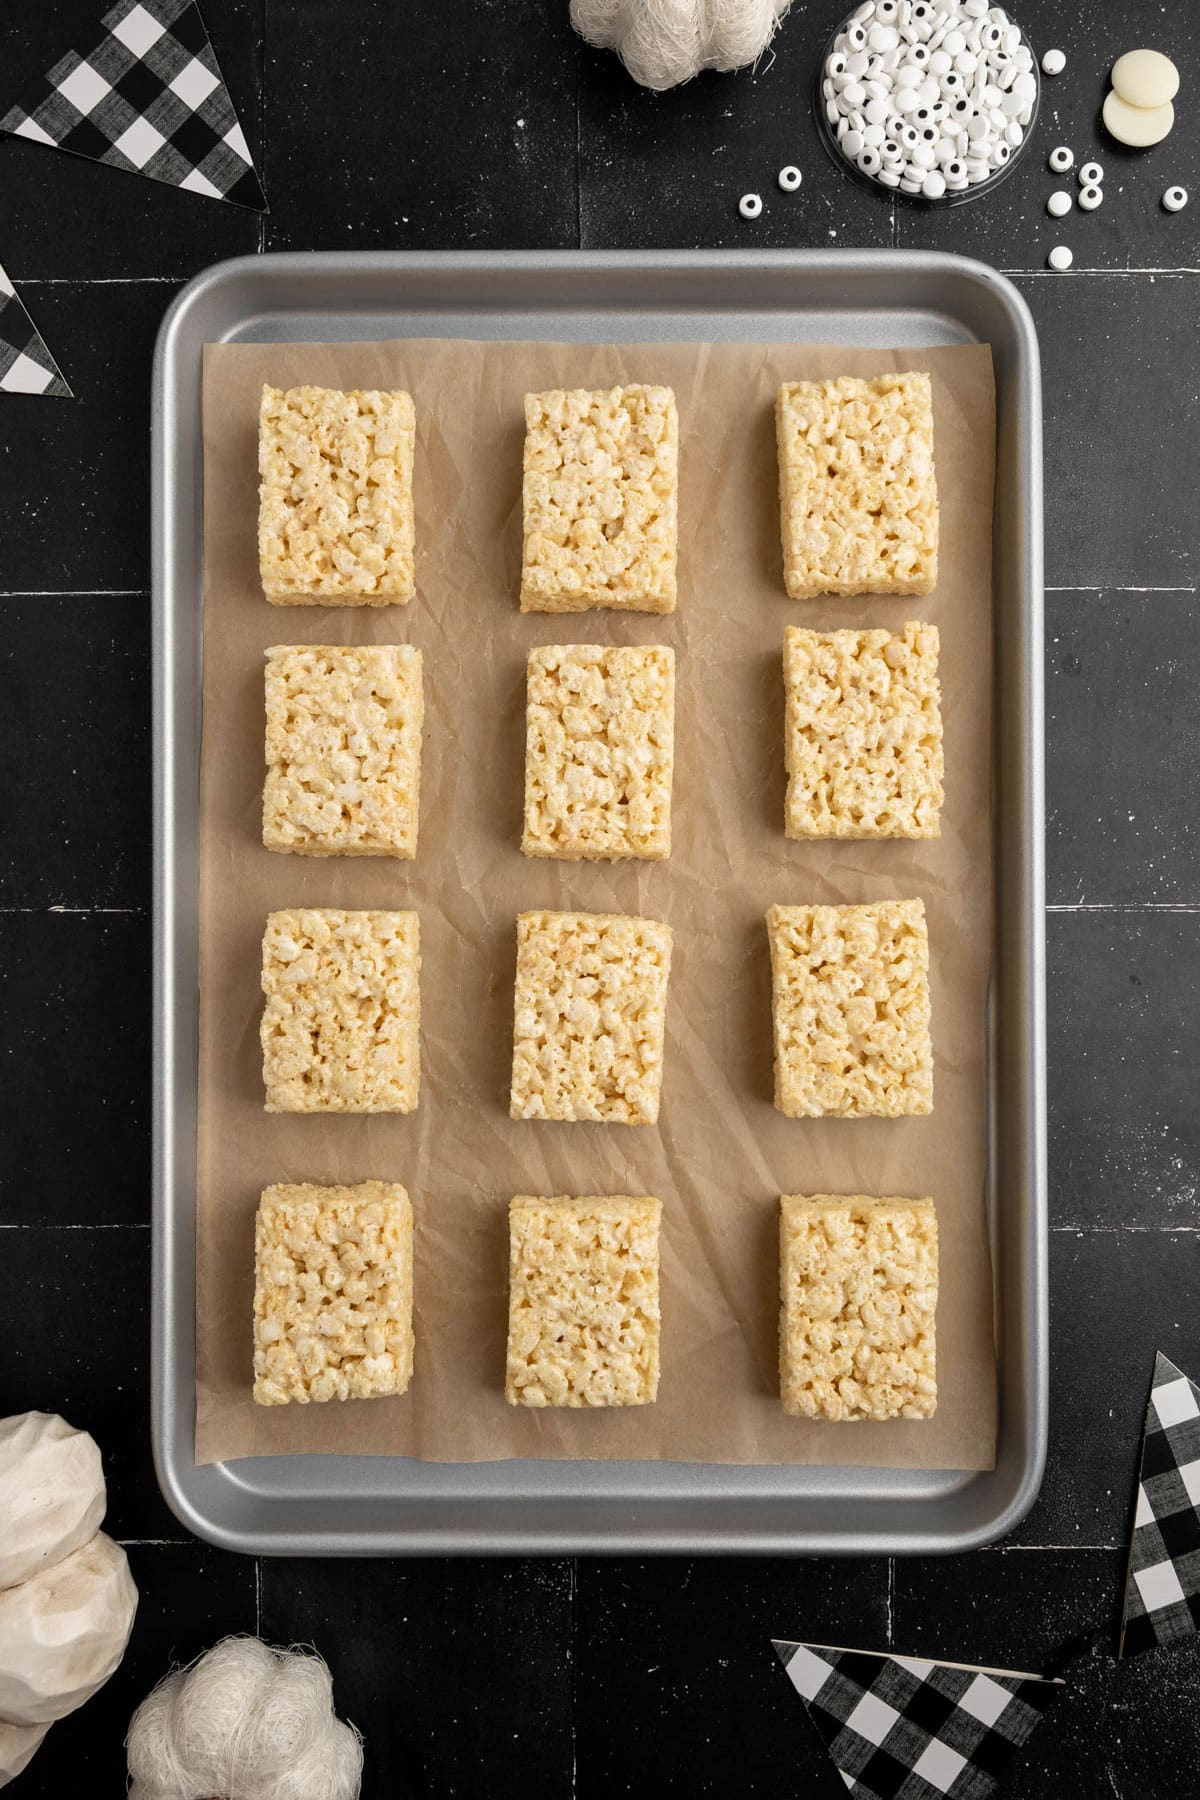 Another process of preparing Mummy Rice Krispies Treats is to arrange the krispies on trays